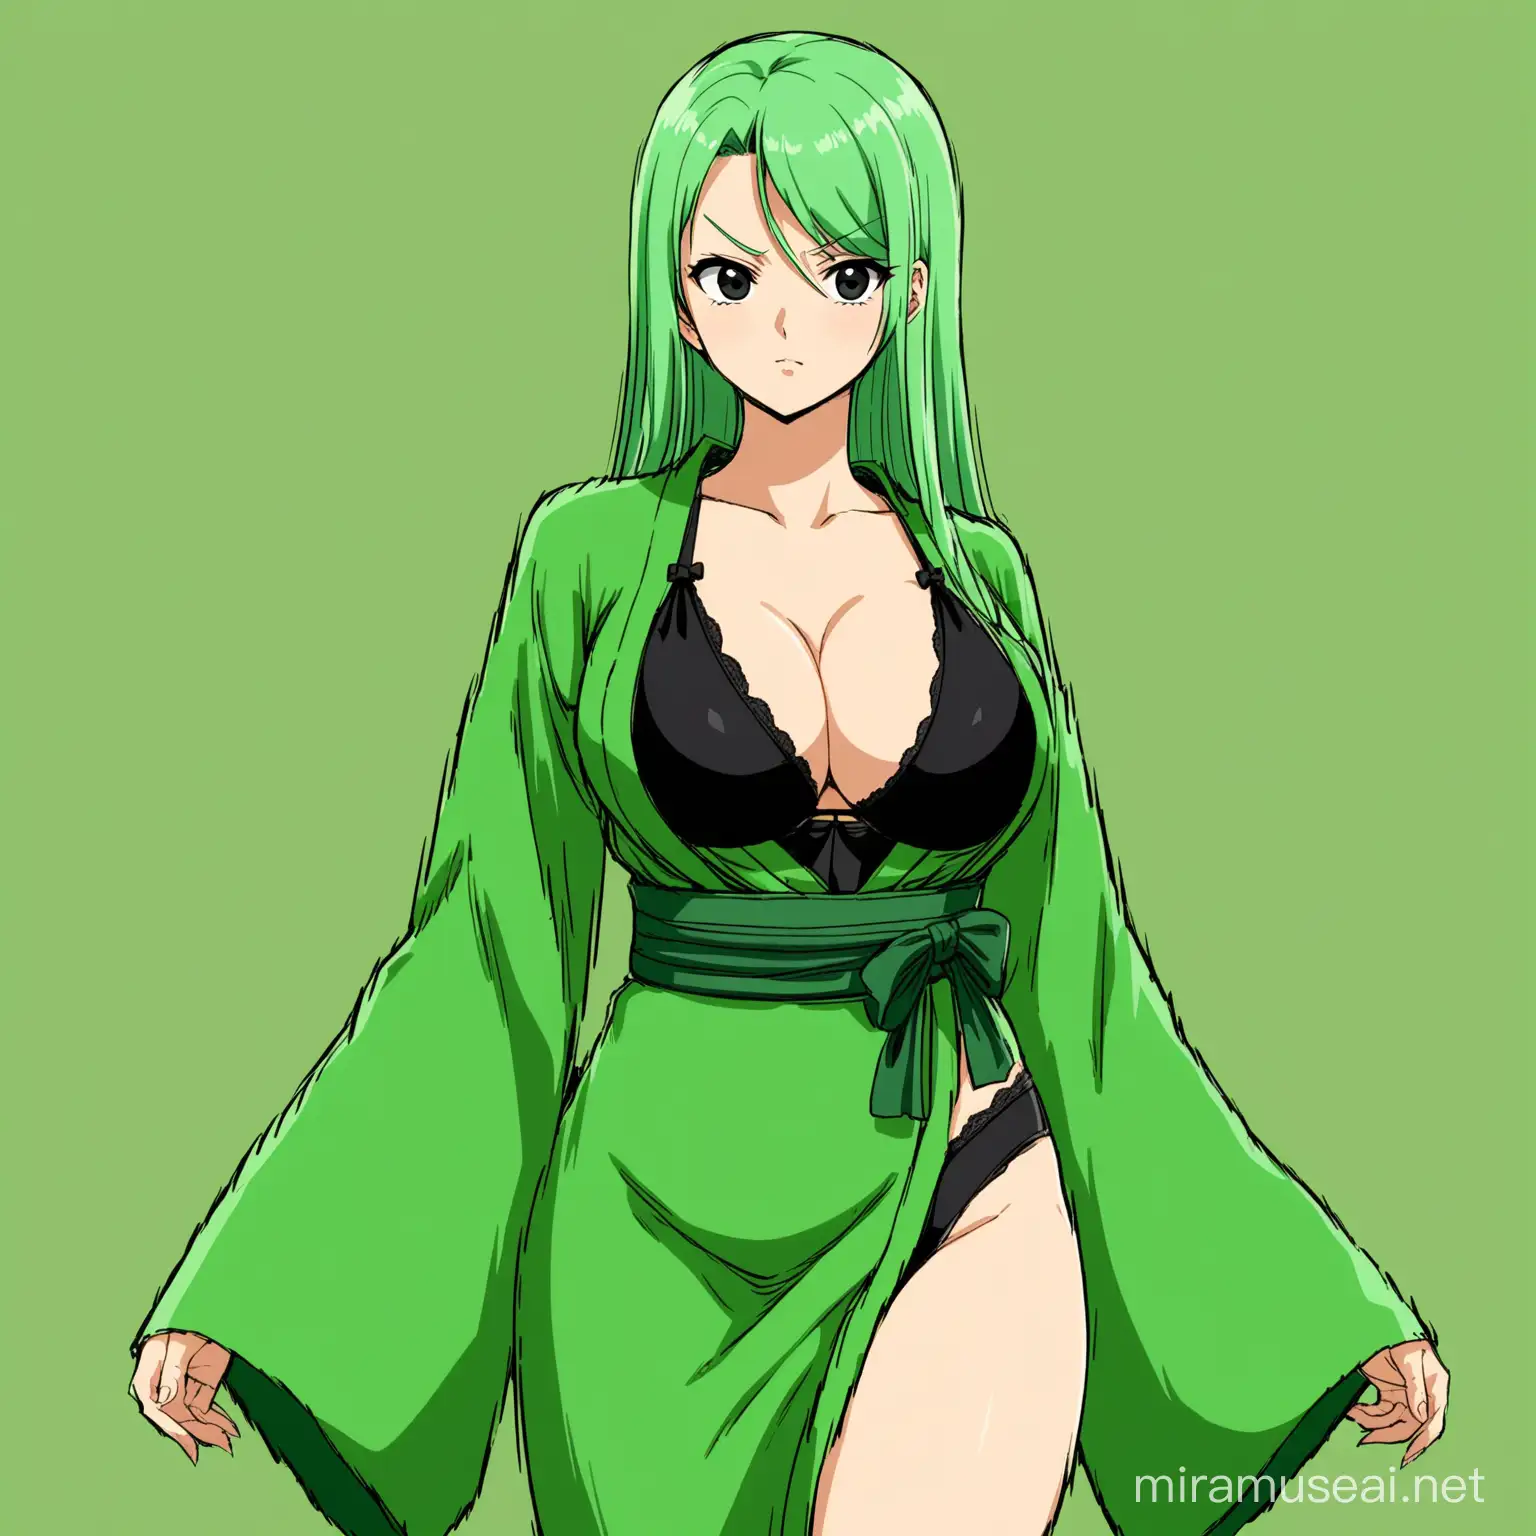 Roronoa Zoro (from One Piece) as female. Anime style animated, proper and welly illustrated, green long hair, black eyes, big boobs, black bra inside a green feminine kimono.